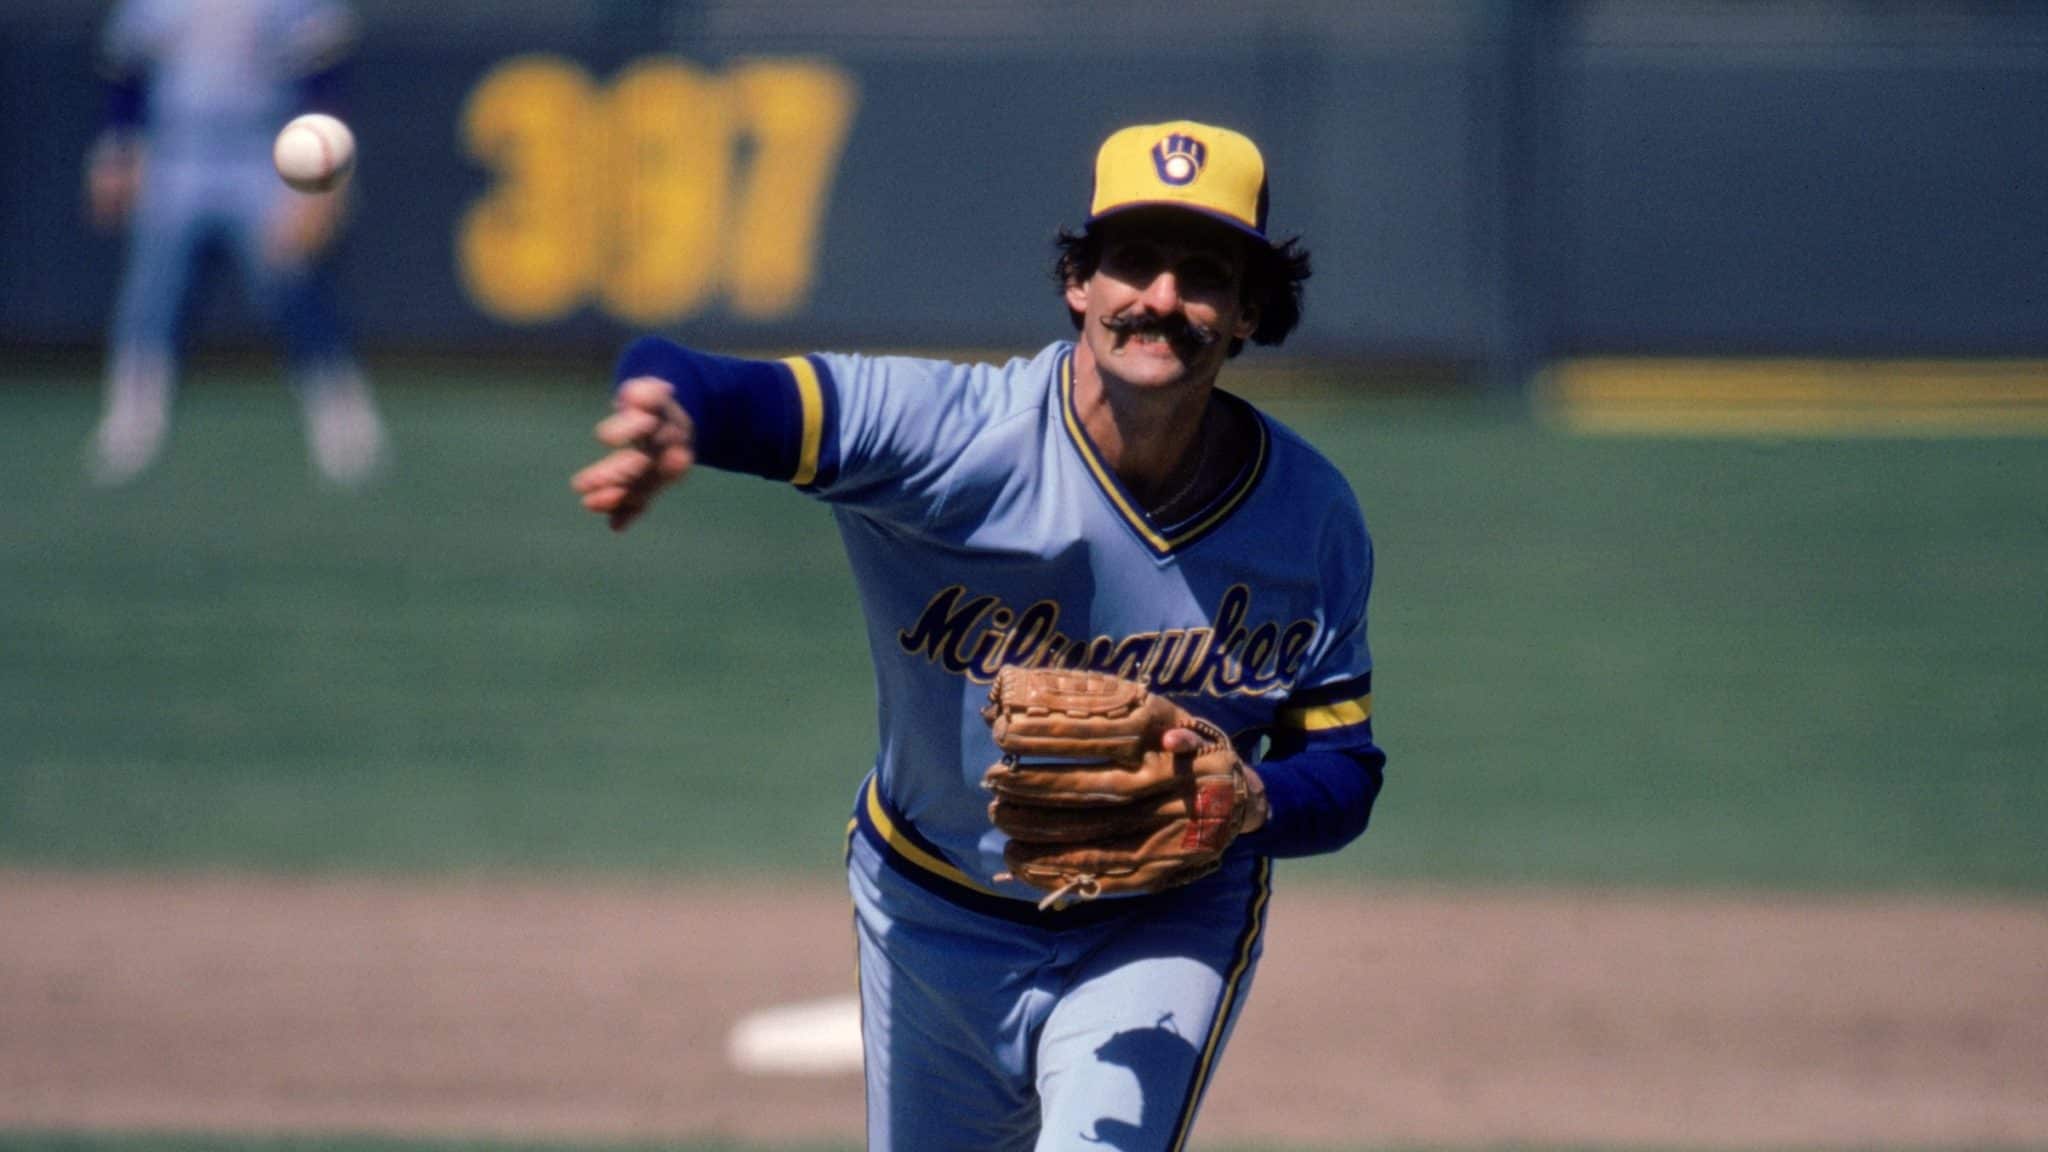 Hall of Fame reliever Rollie Fingers relives Brewers memories